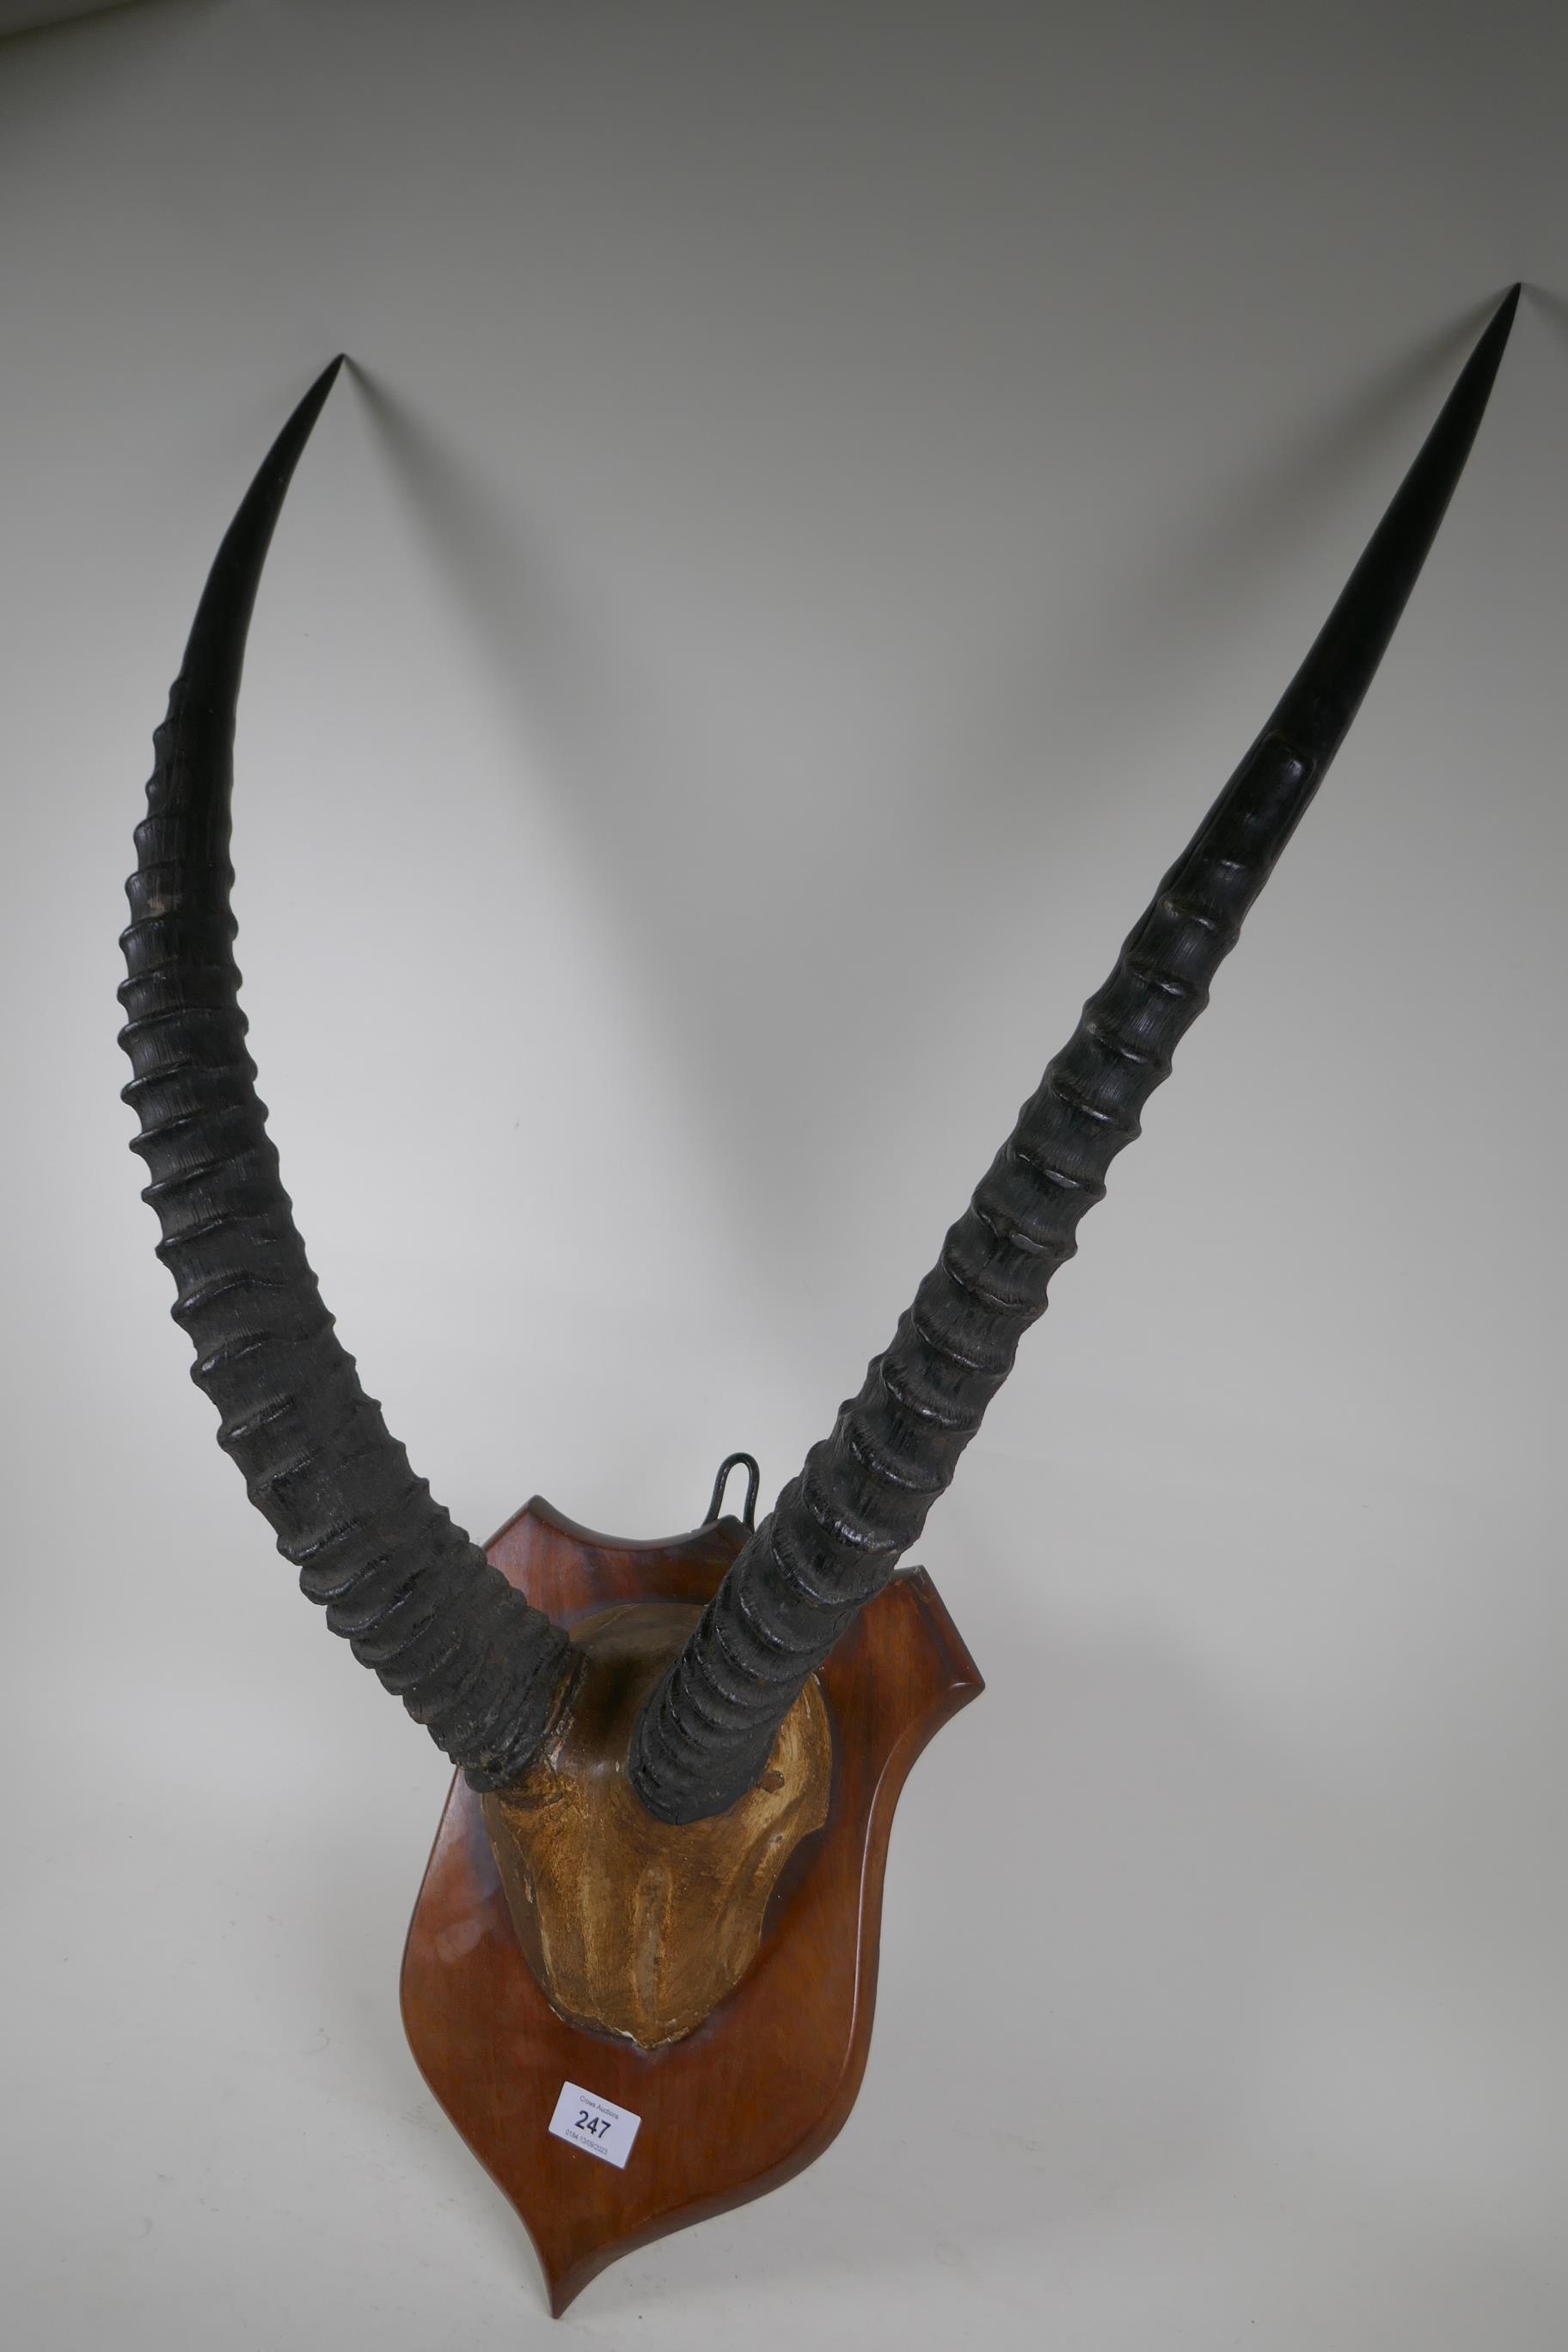 Antique pair of horns mounted on a shield shaped plaque, 90cm high - Image 2 of 2